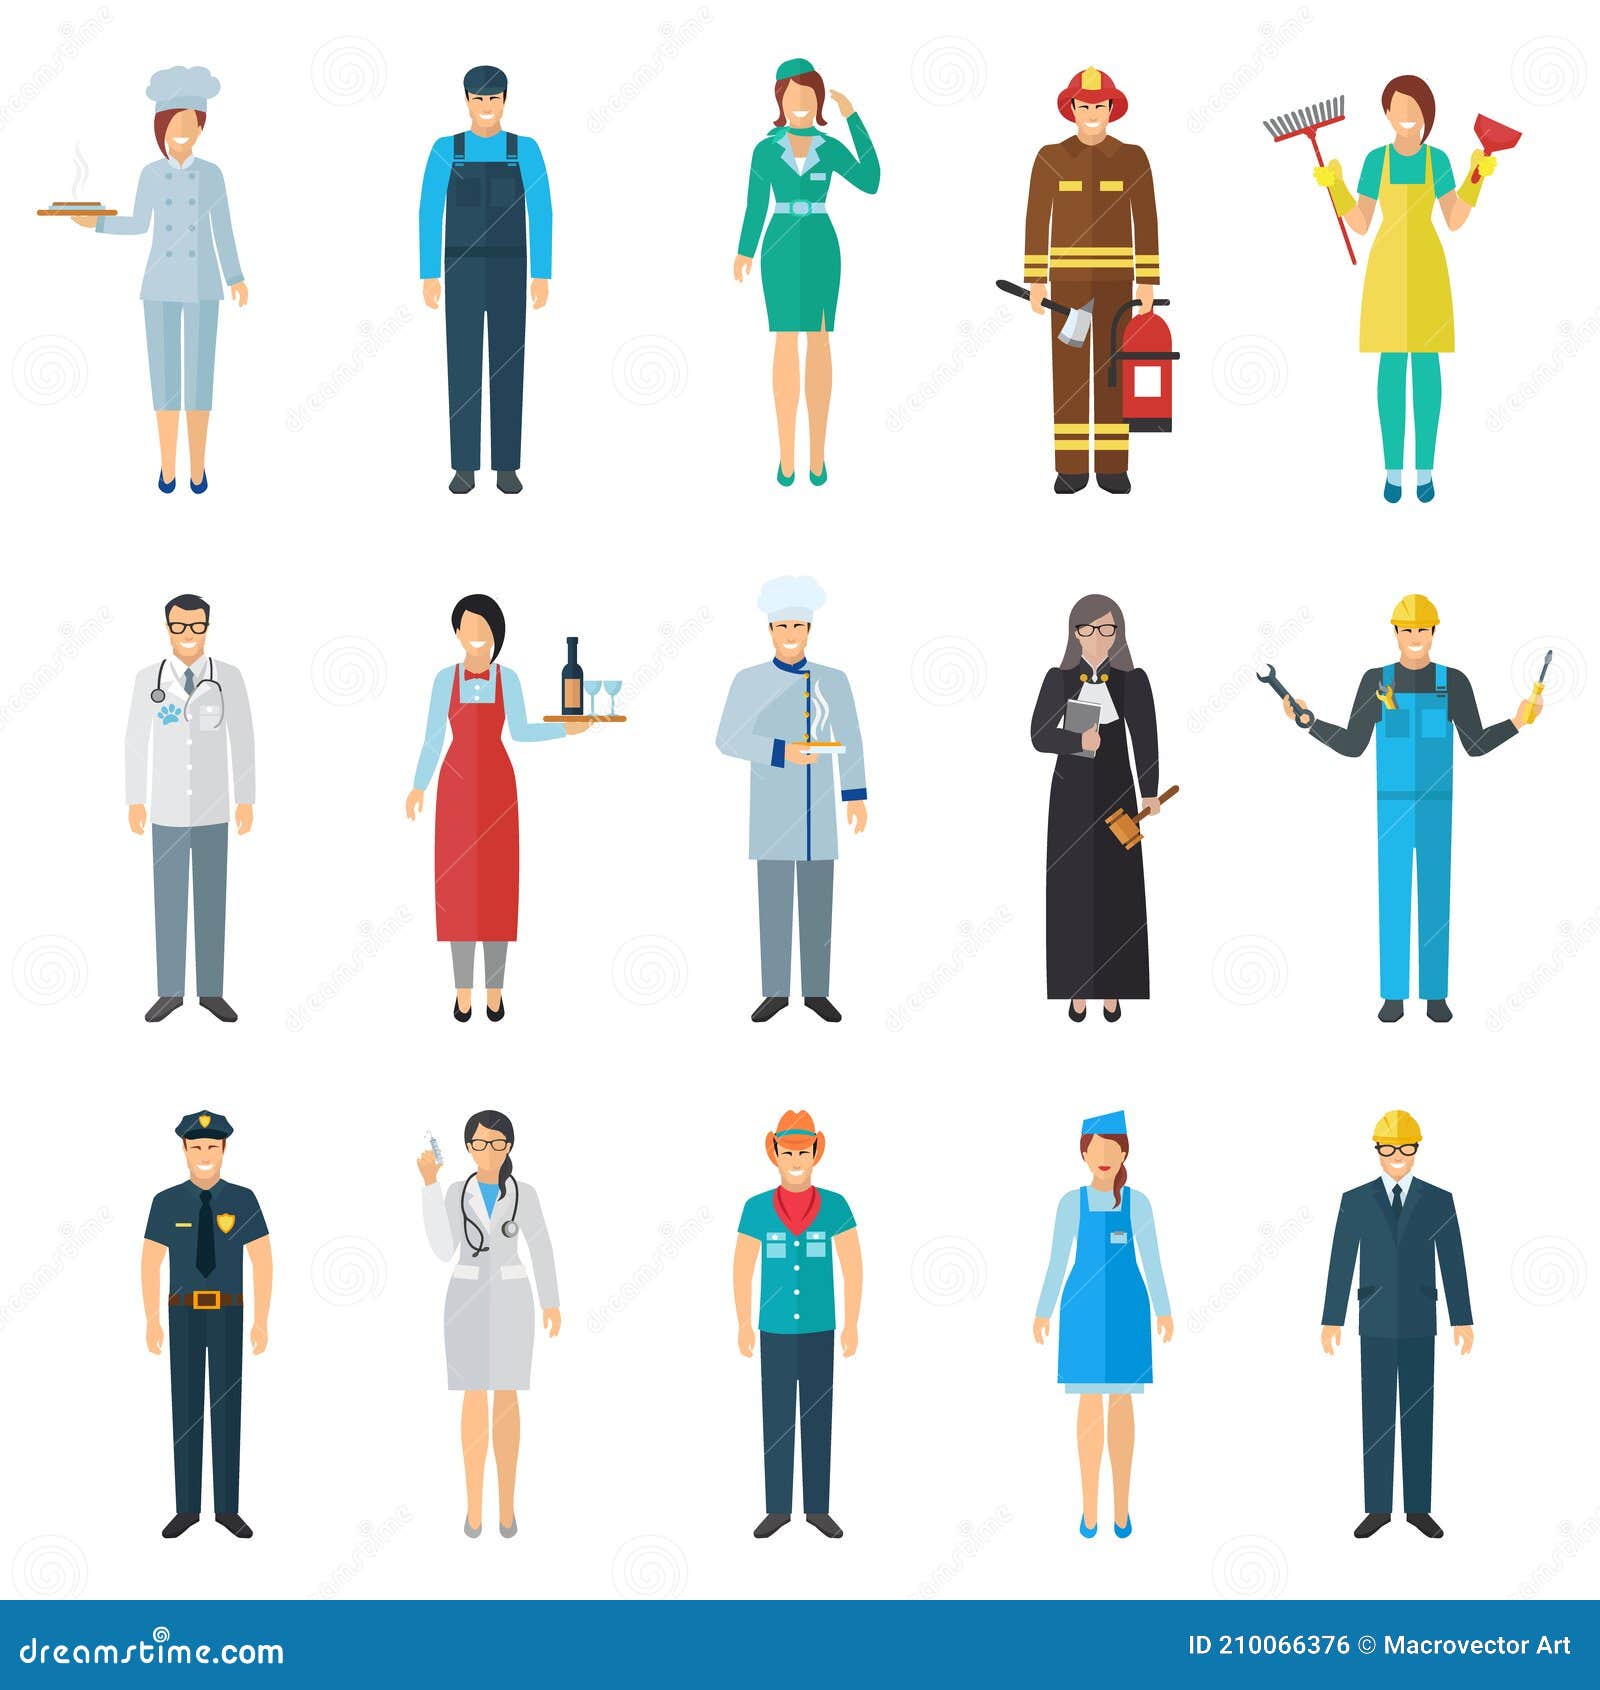 Profession Avatar Icons Set Stock Vector - Illustration of personnel ...